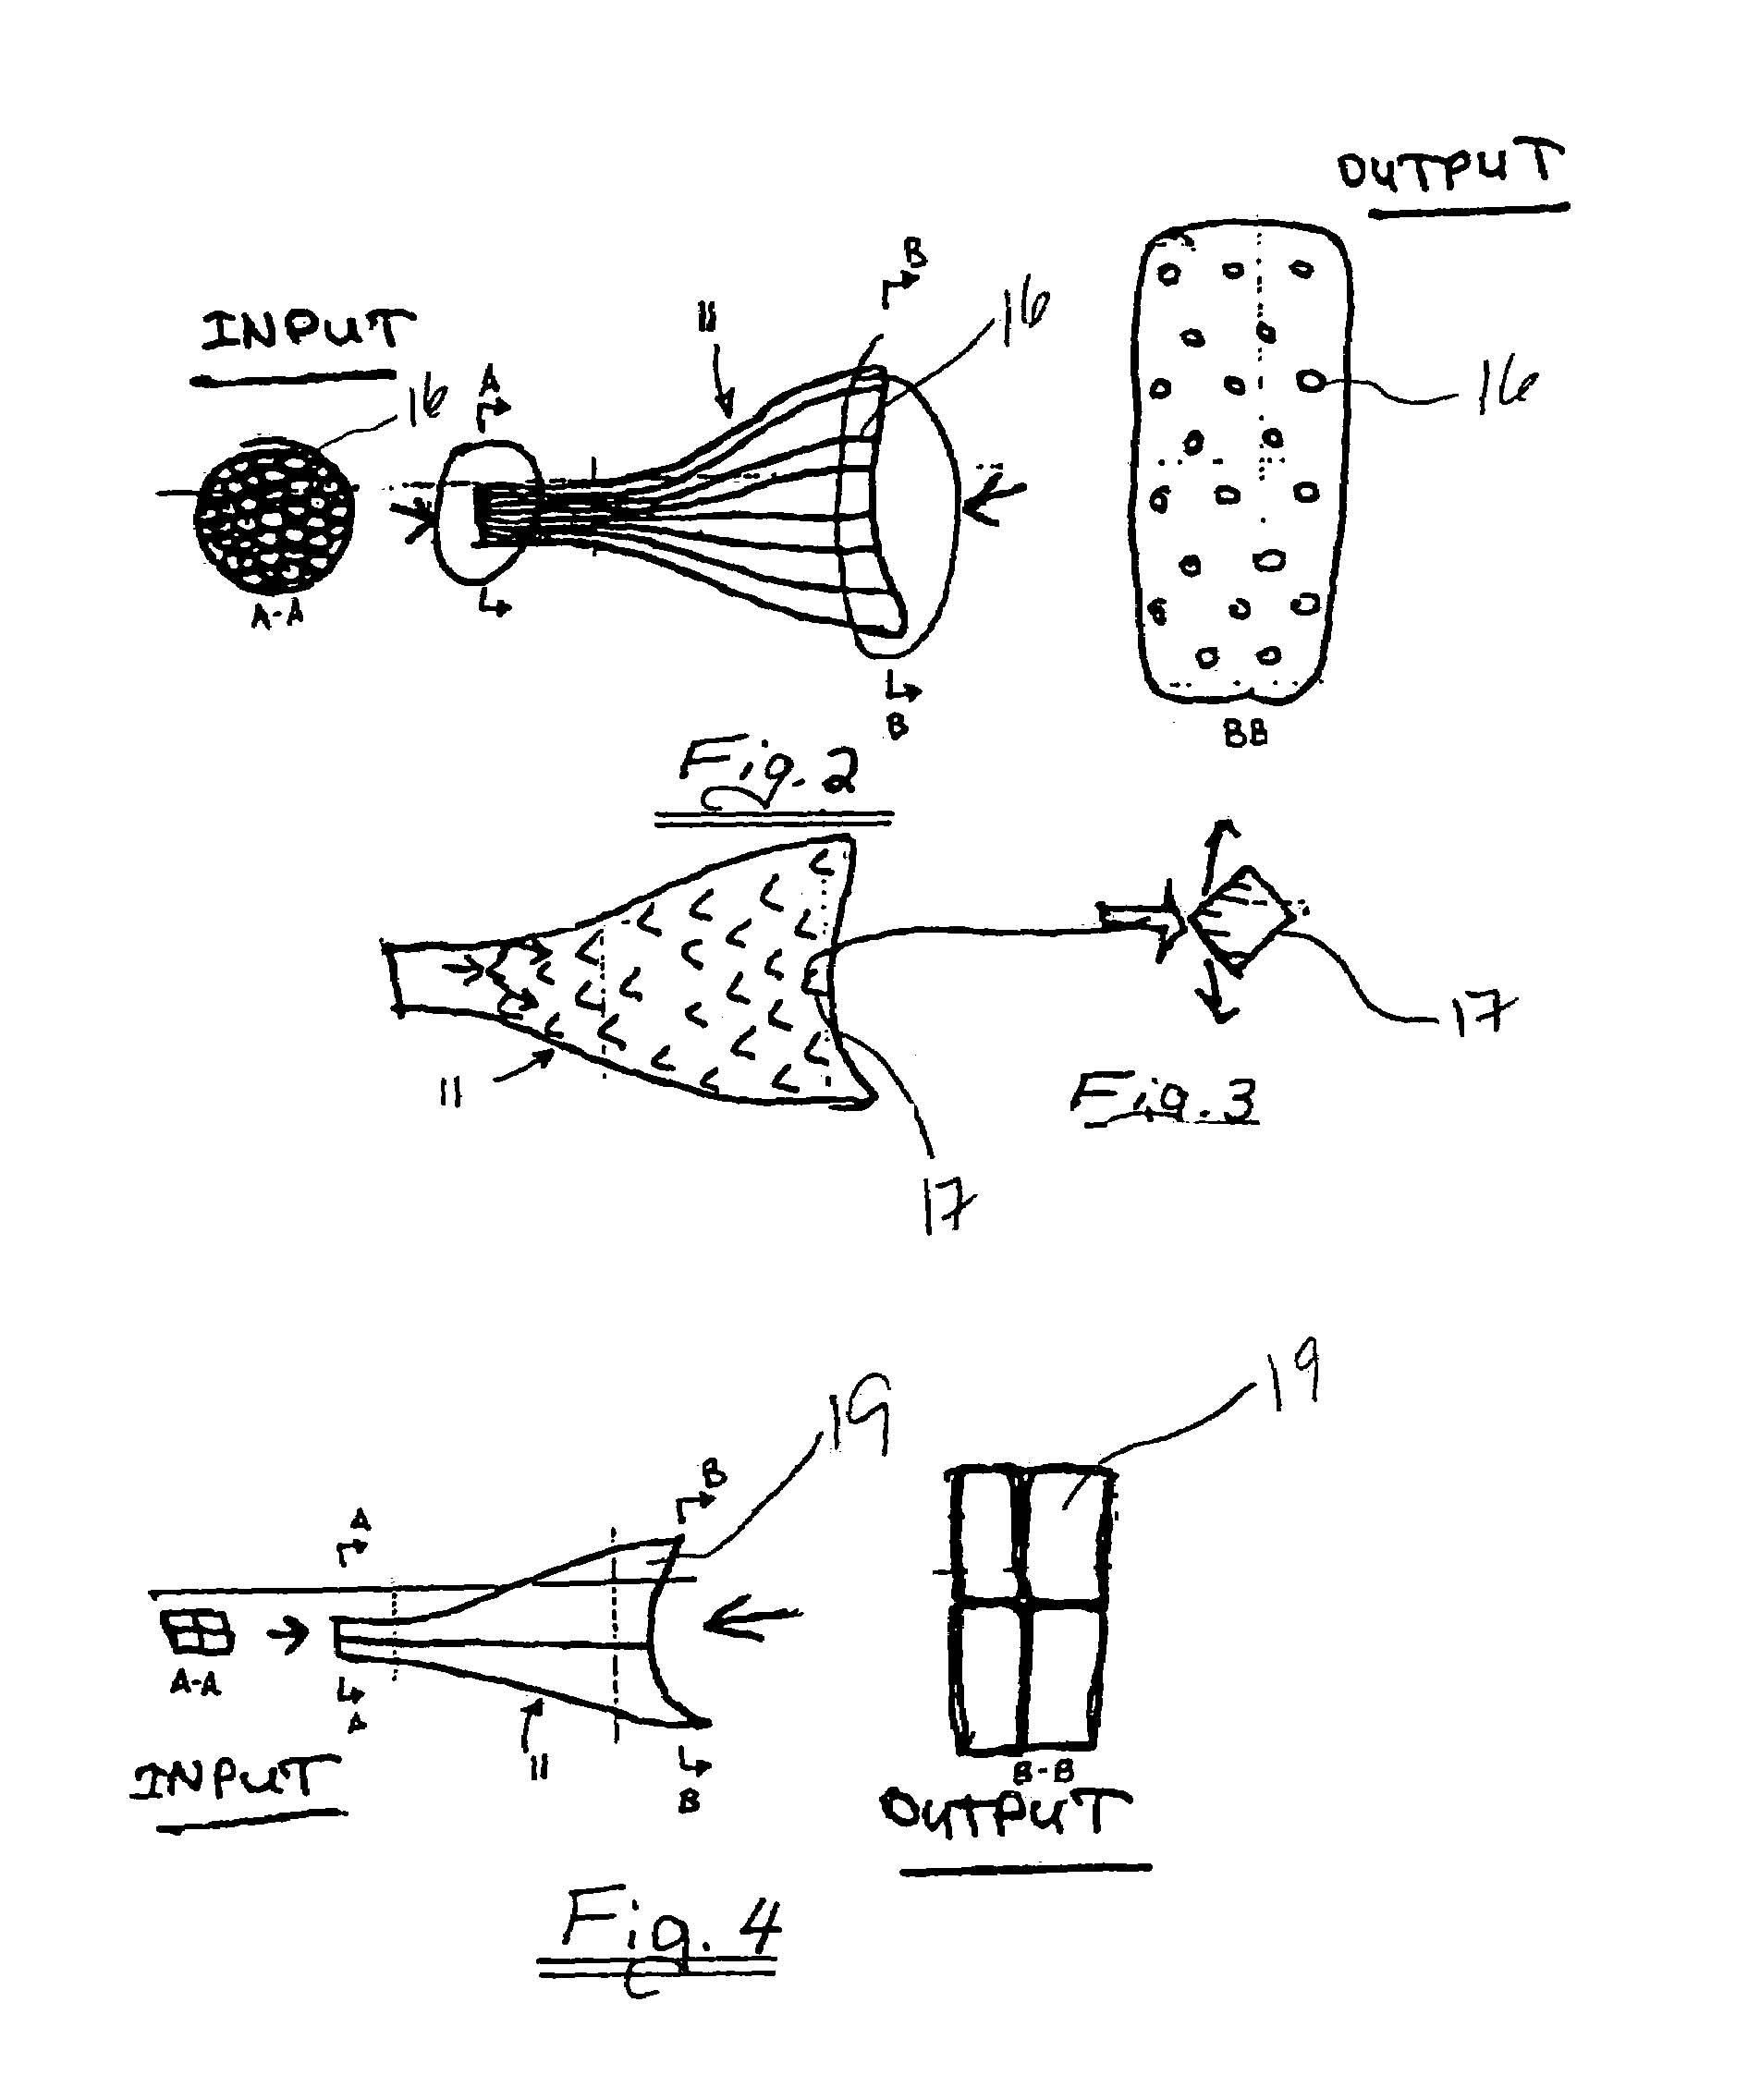 Tapered fused waveguide for delivering treatment electromagnetic radiation toward a target surfaced